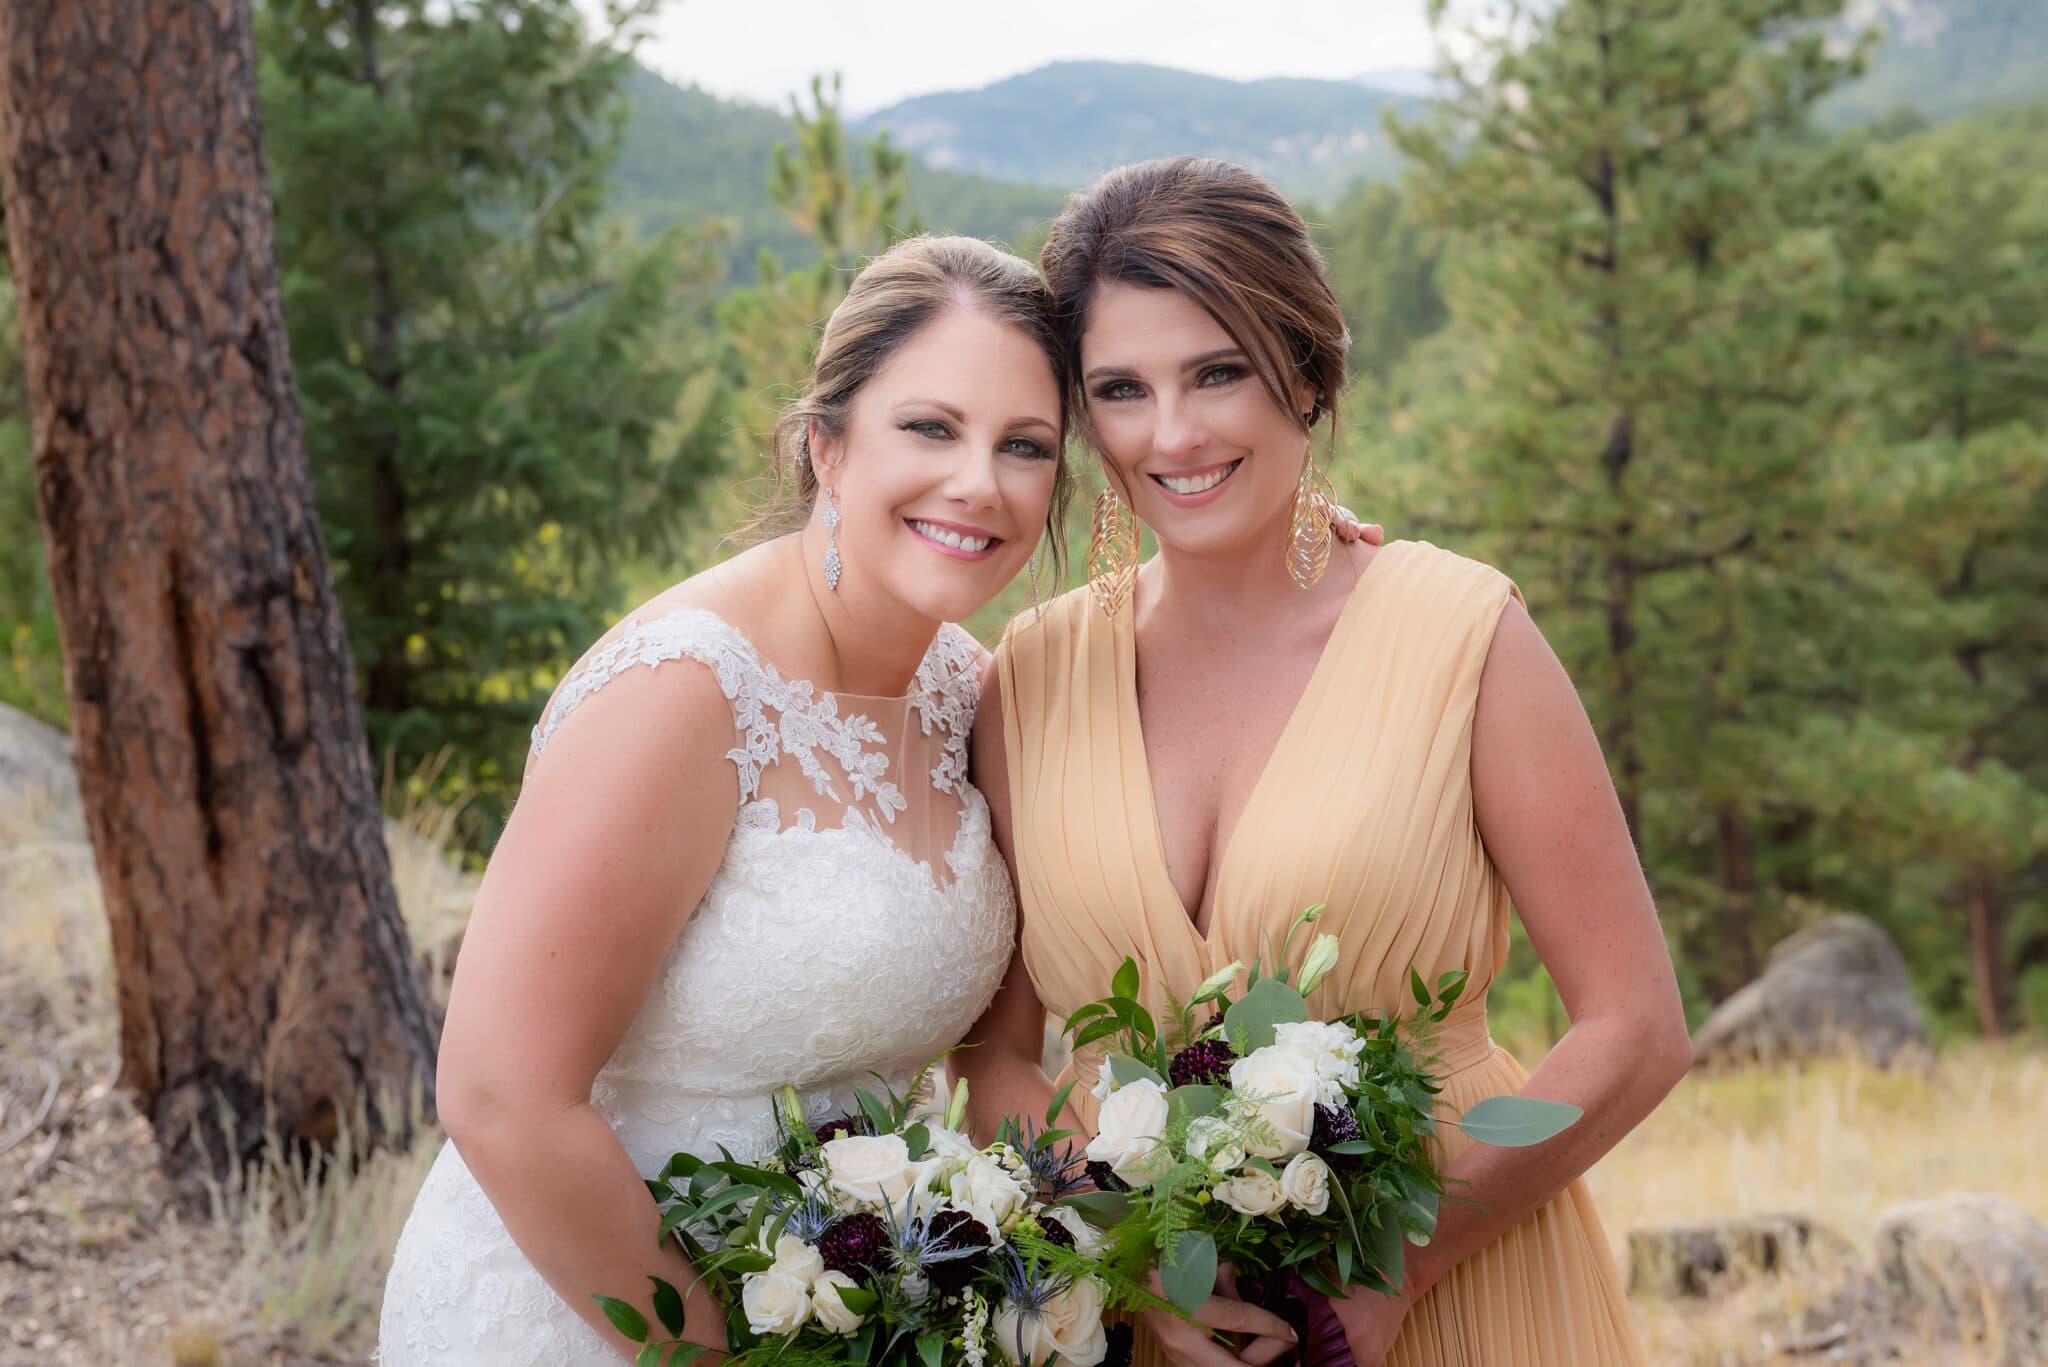 Bride and matron of honor in Evergreen, Colorado with fur trees and mountain view.